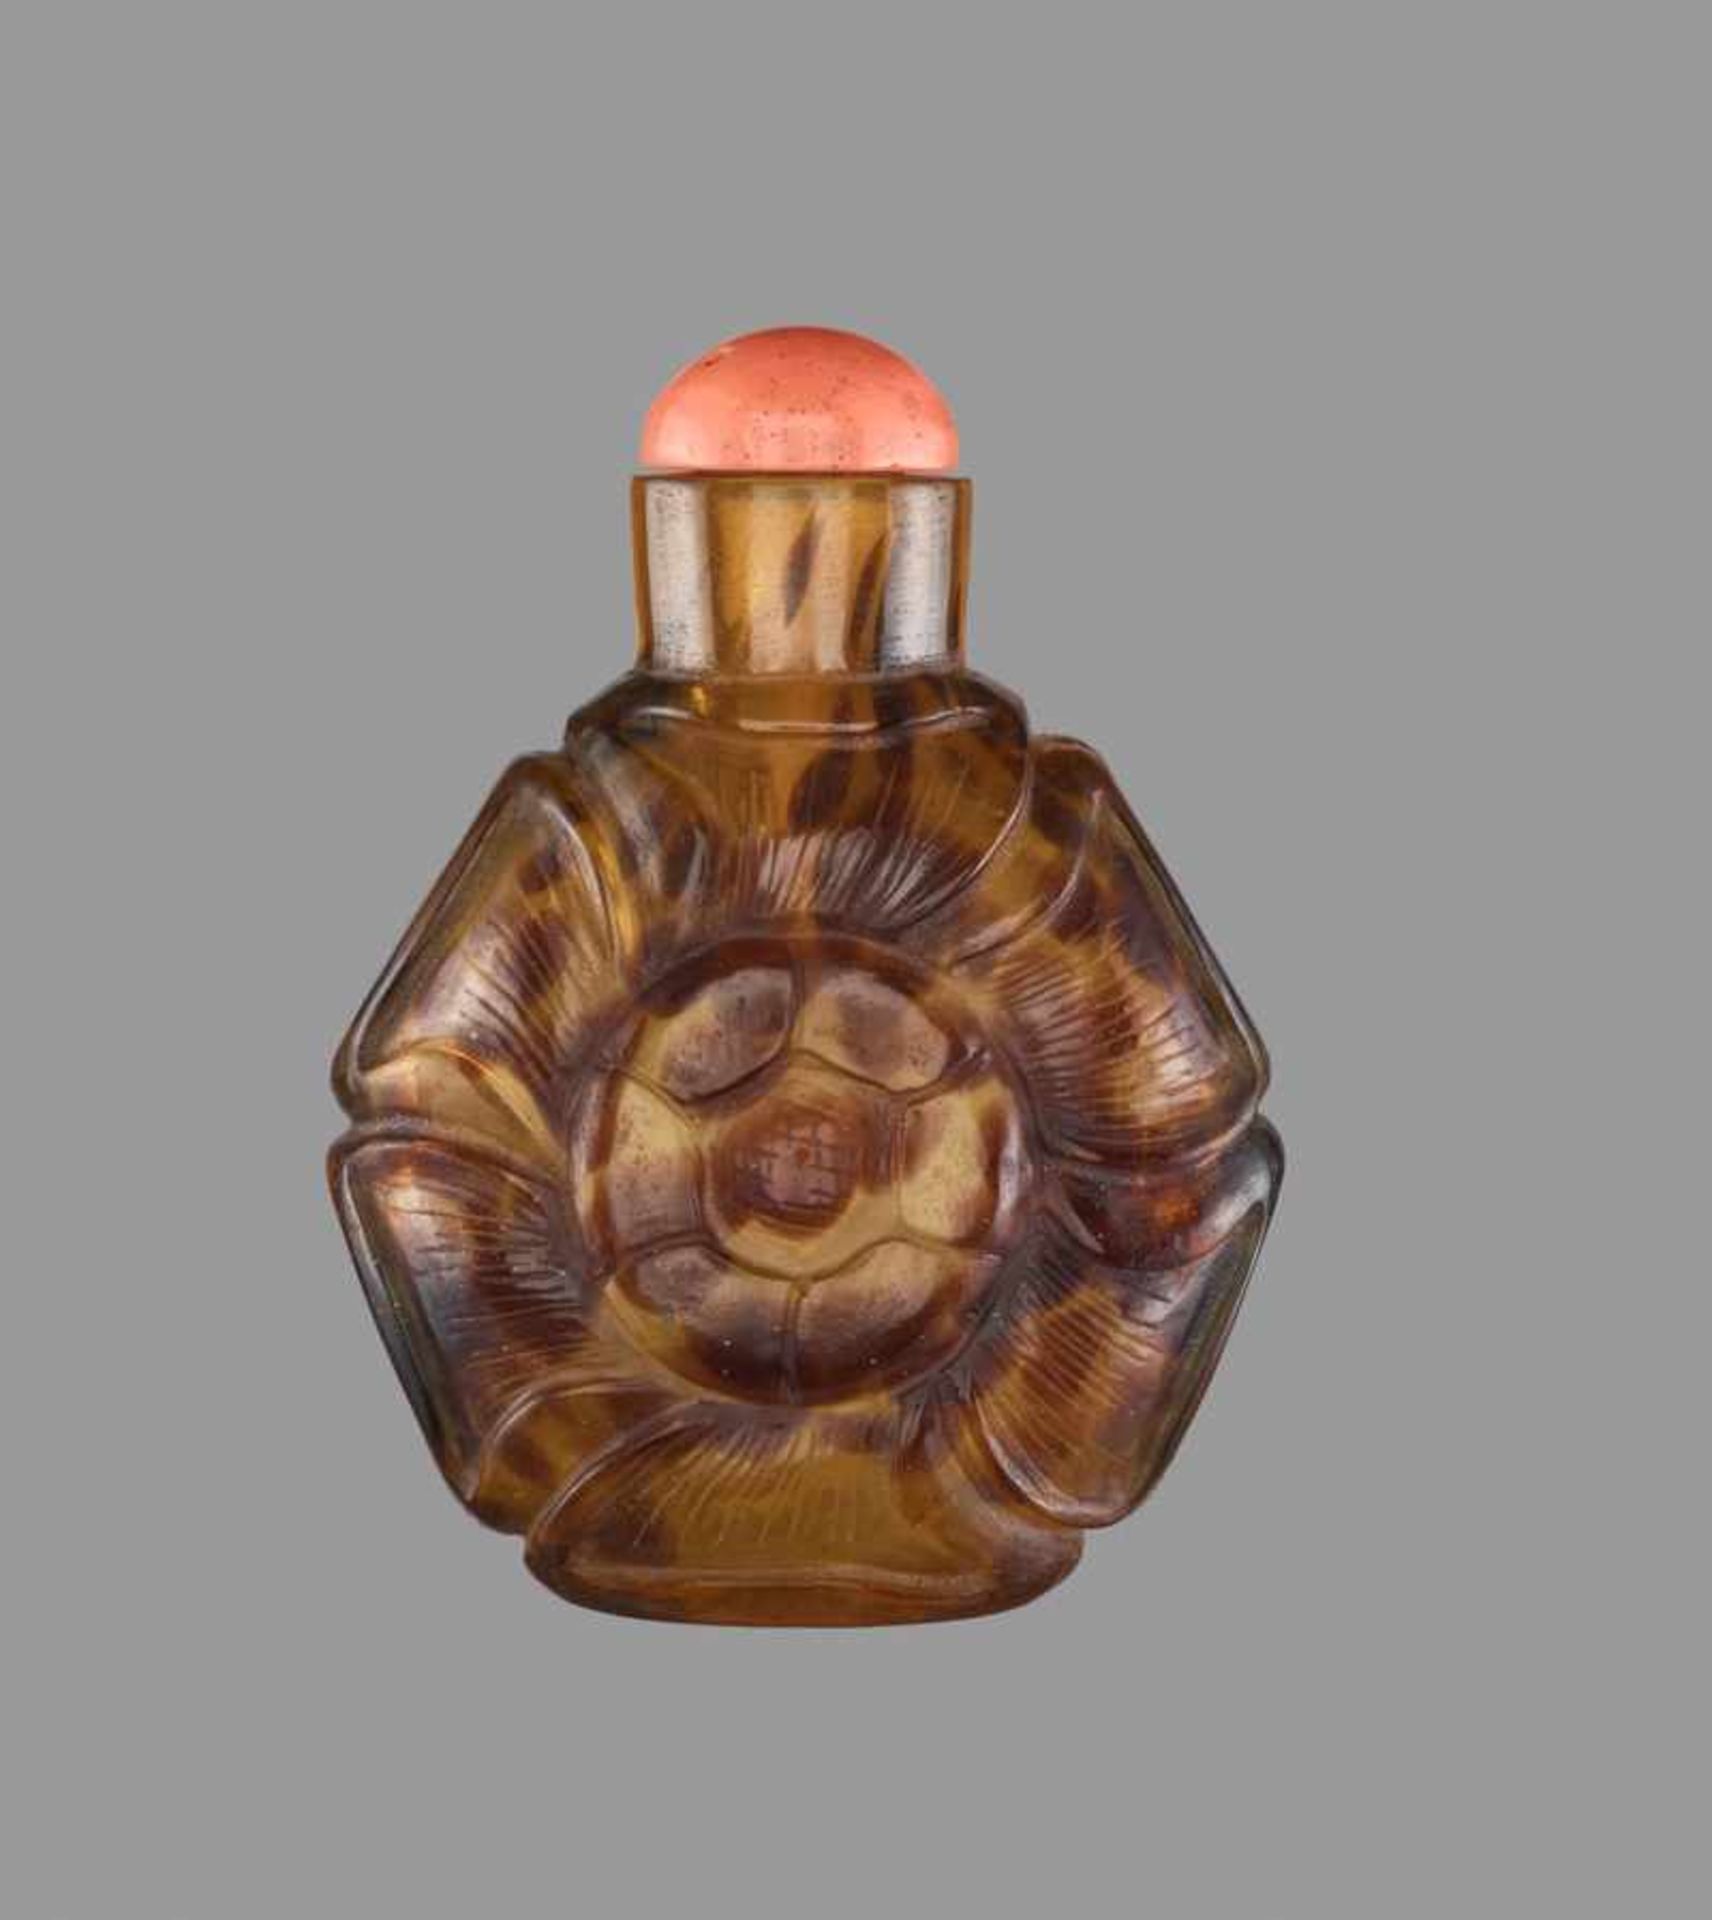 A FLOWER SHAPED ‘TORTOISESHELL’ GLASS SNUFF BOTTLE Splashes and streaks of dark brown sandwiched - Image 2 of 6